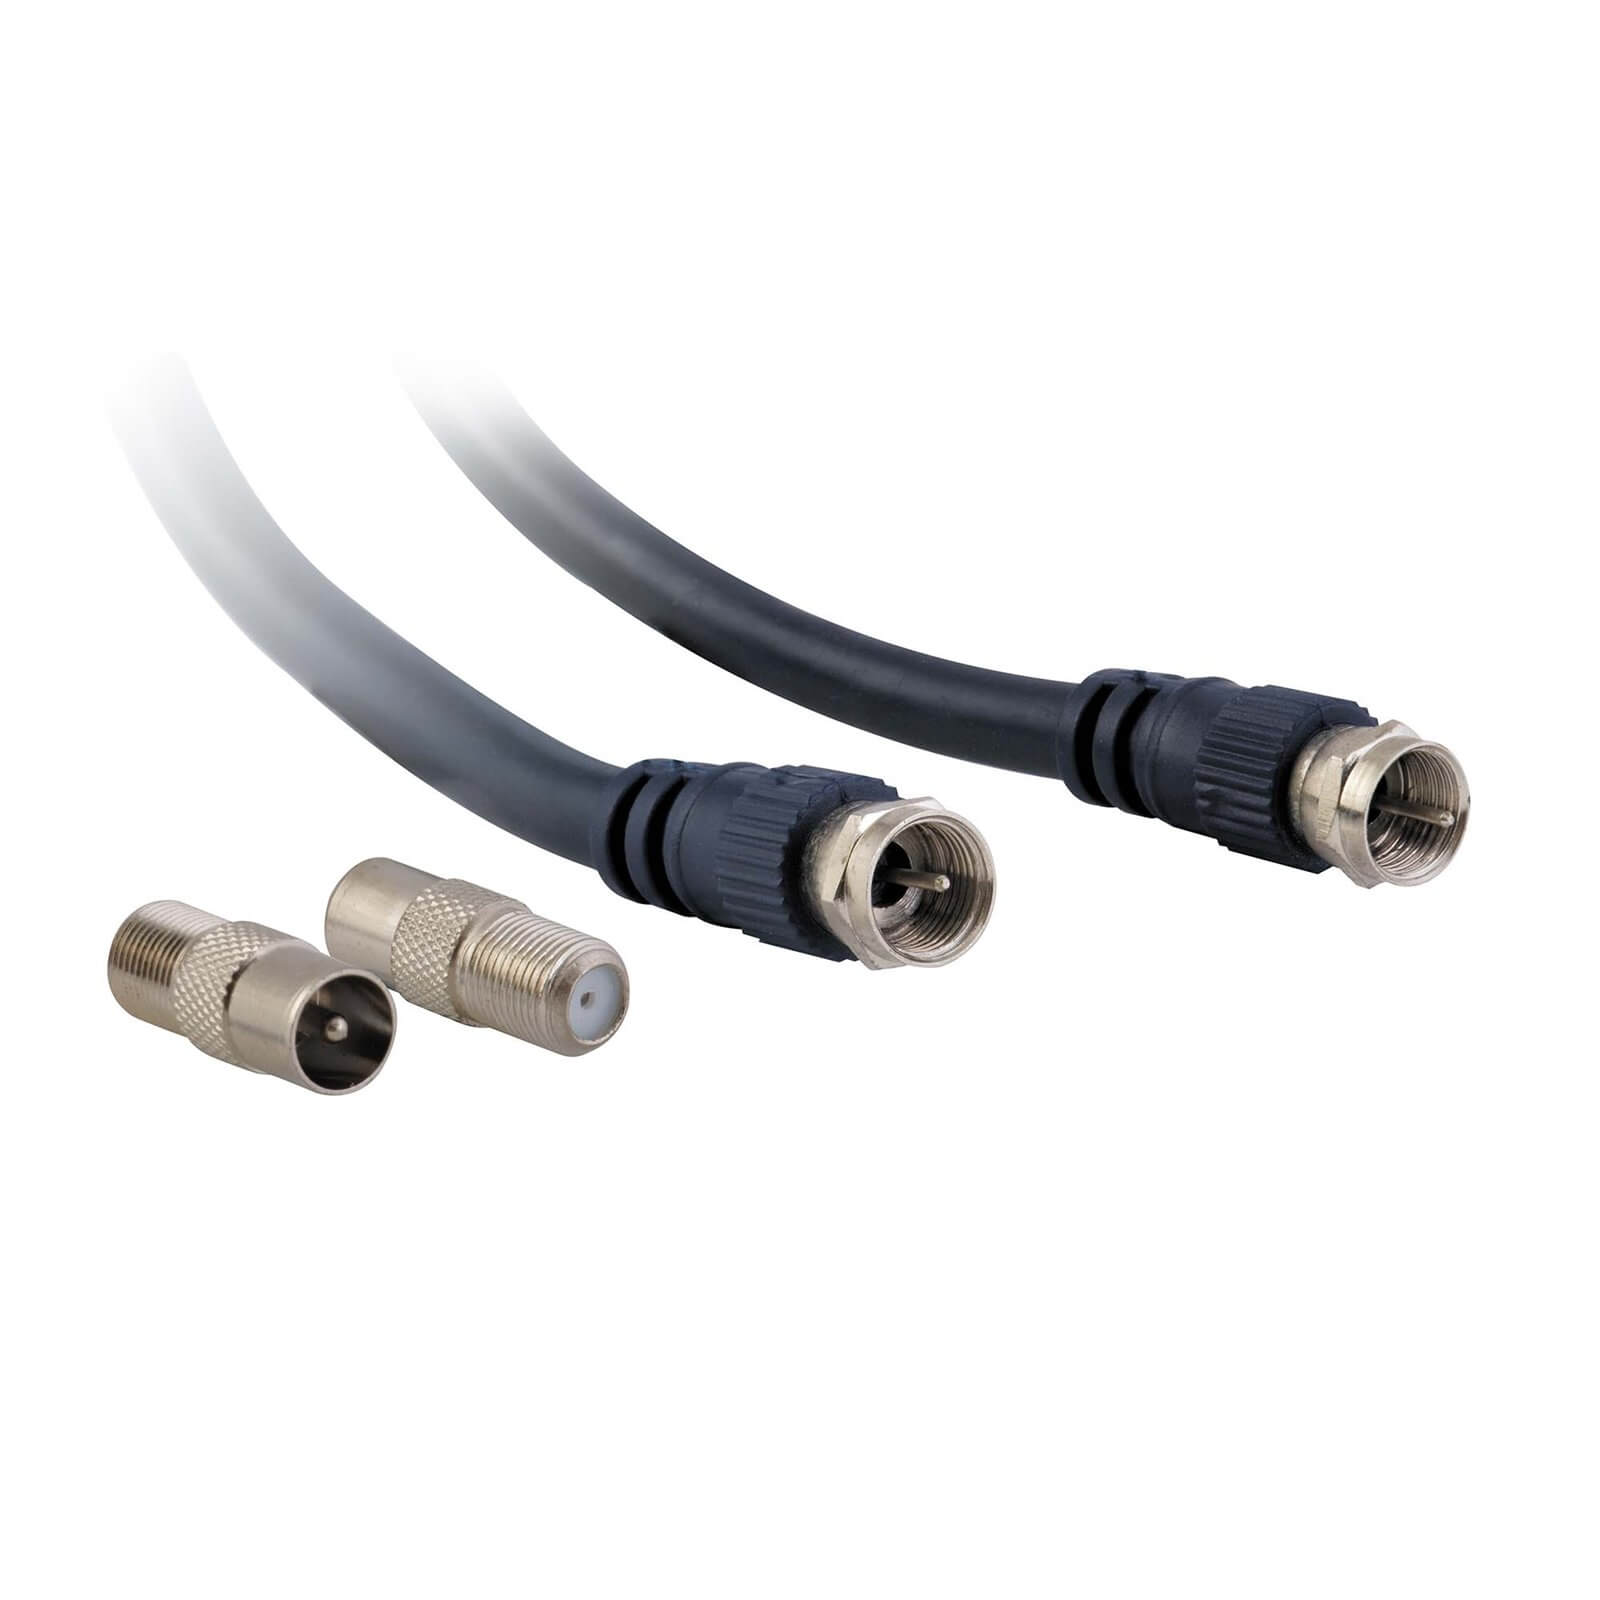 3m TV Cable & F-type Connectors